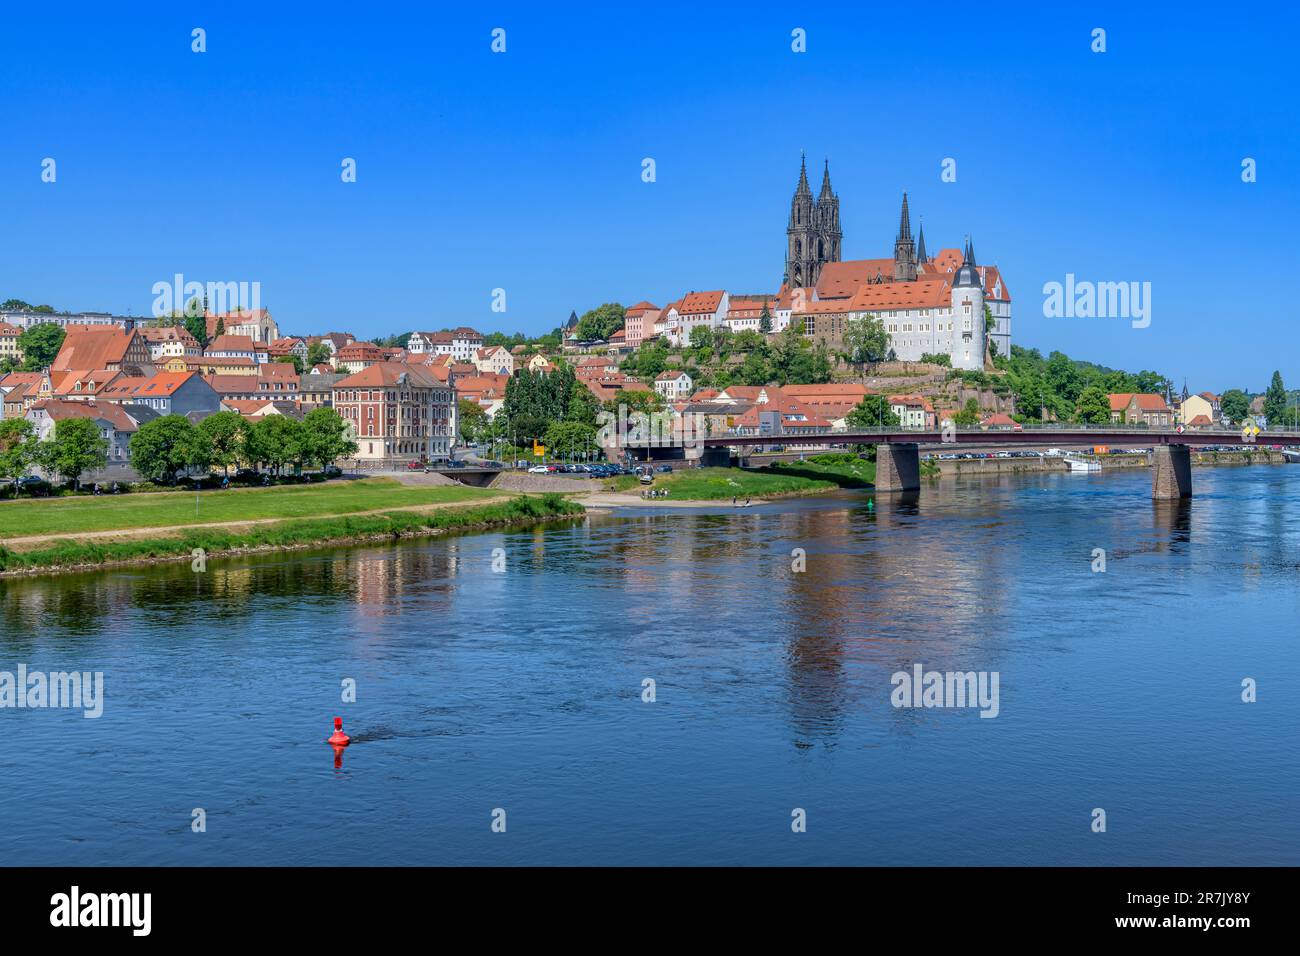 Iconic Meissen with Albrechtsburg Castle (Albrechtsburg Meissen) and Cathedral (Dom zu Meißen) high above the town reflecting in the river Elbe below. Stock Photo